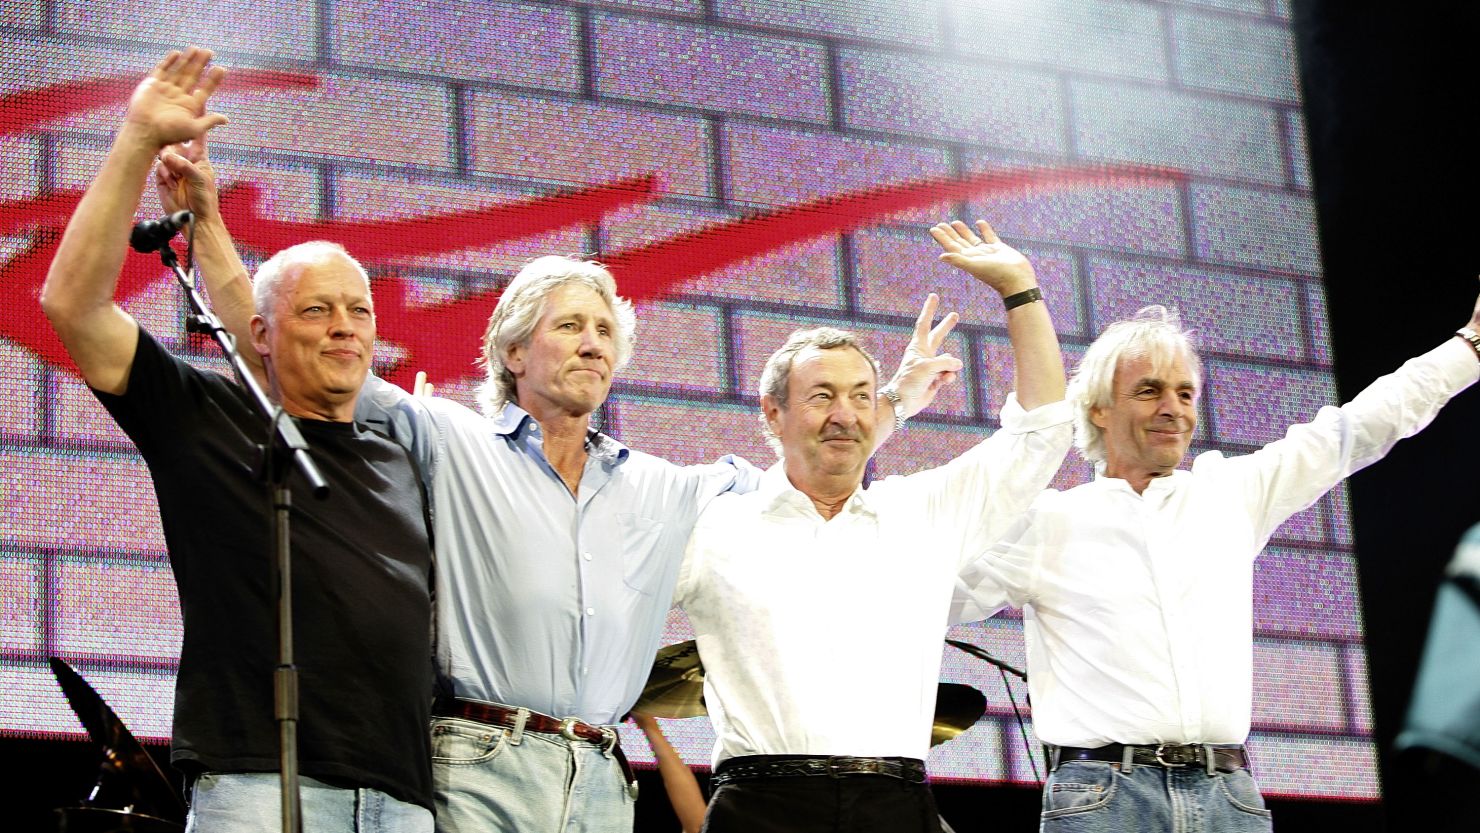 Pink Floyd -- from left, David Gilmour, Roger Waters, Nick Mason and Richard Wright -- at 2005's Live 8 concert.